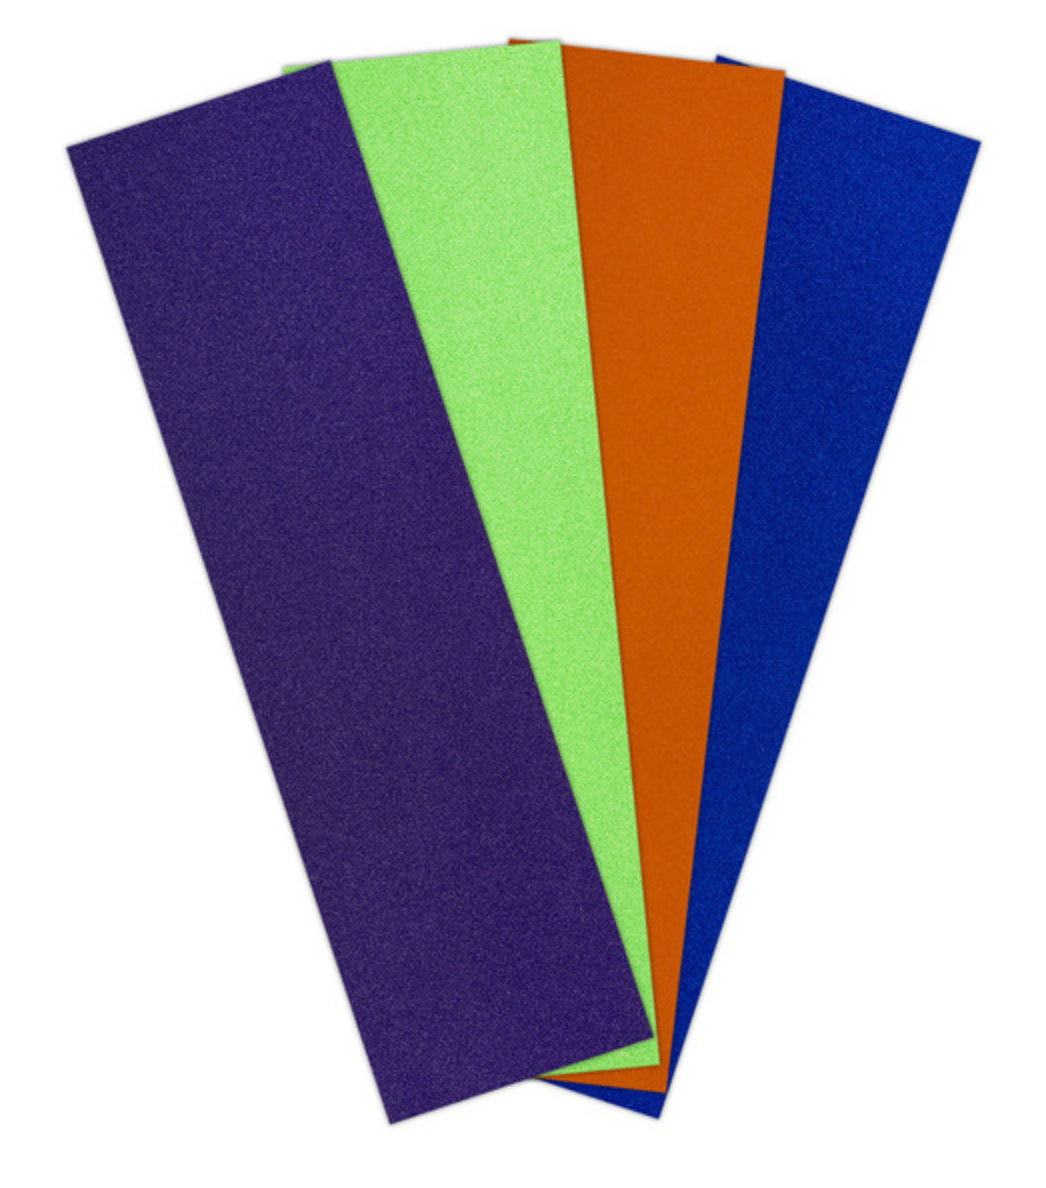 Grip Tape by Jessup USA in Purple, green, orange, and blue